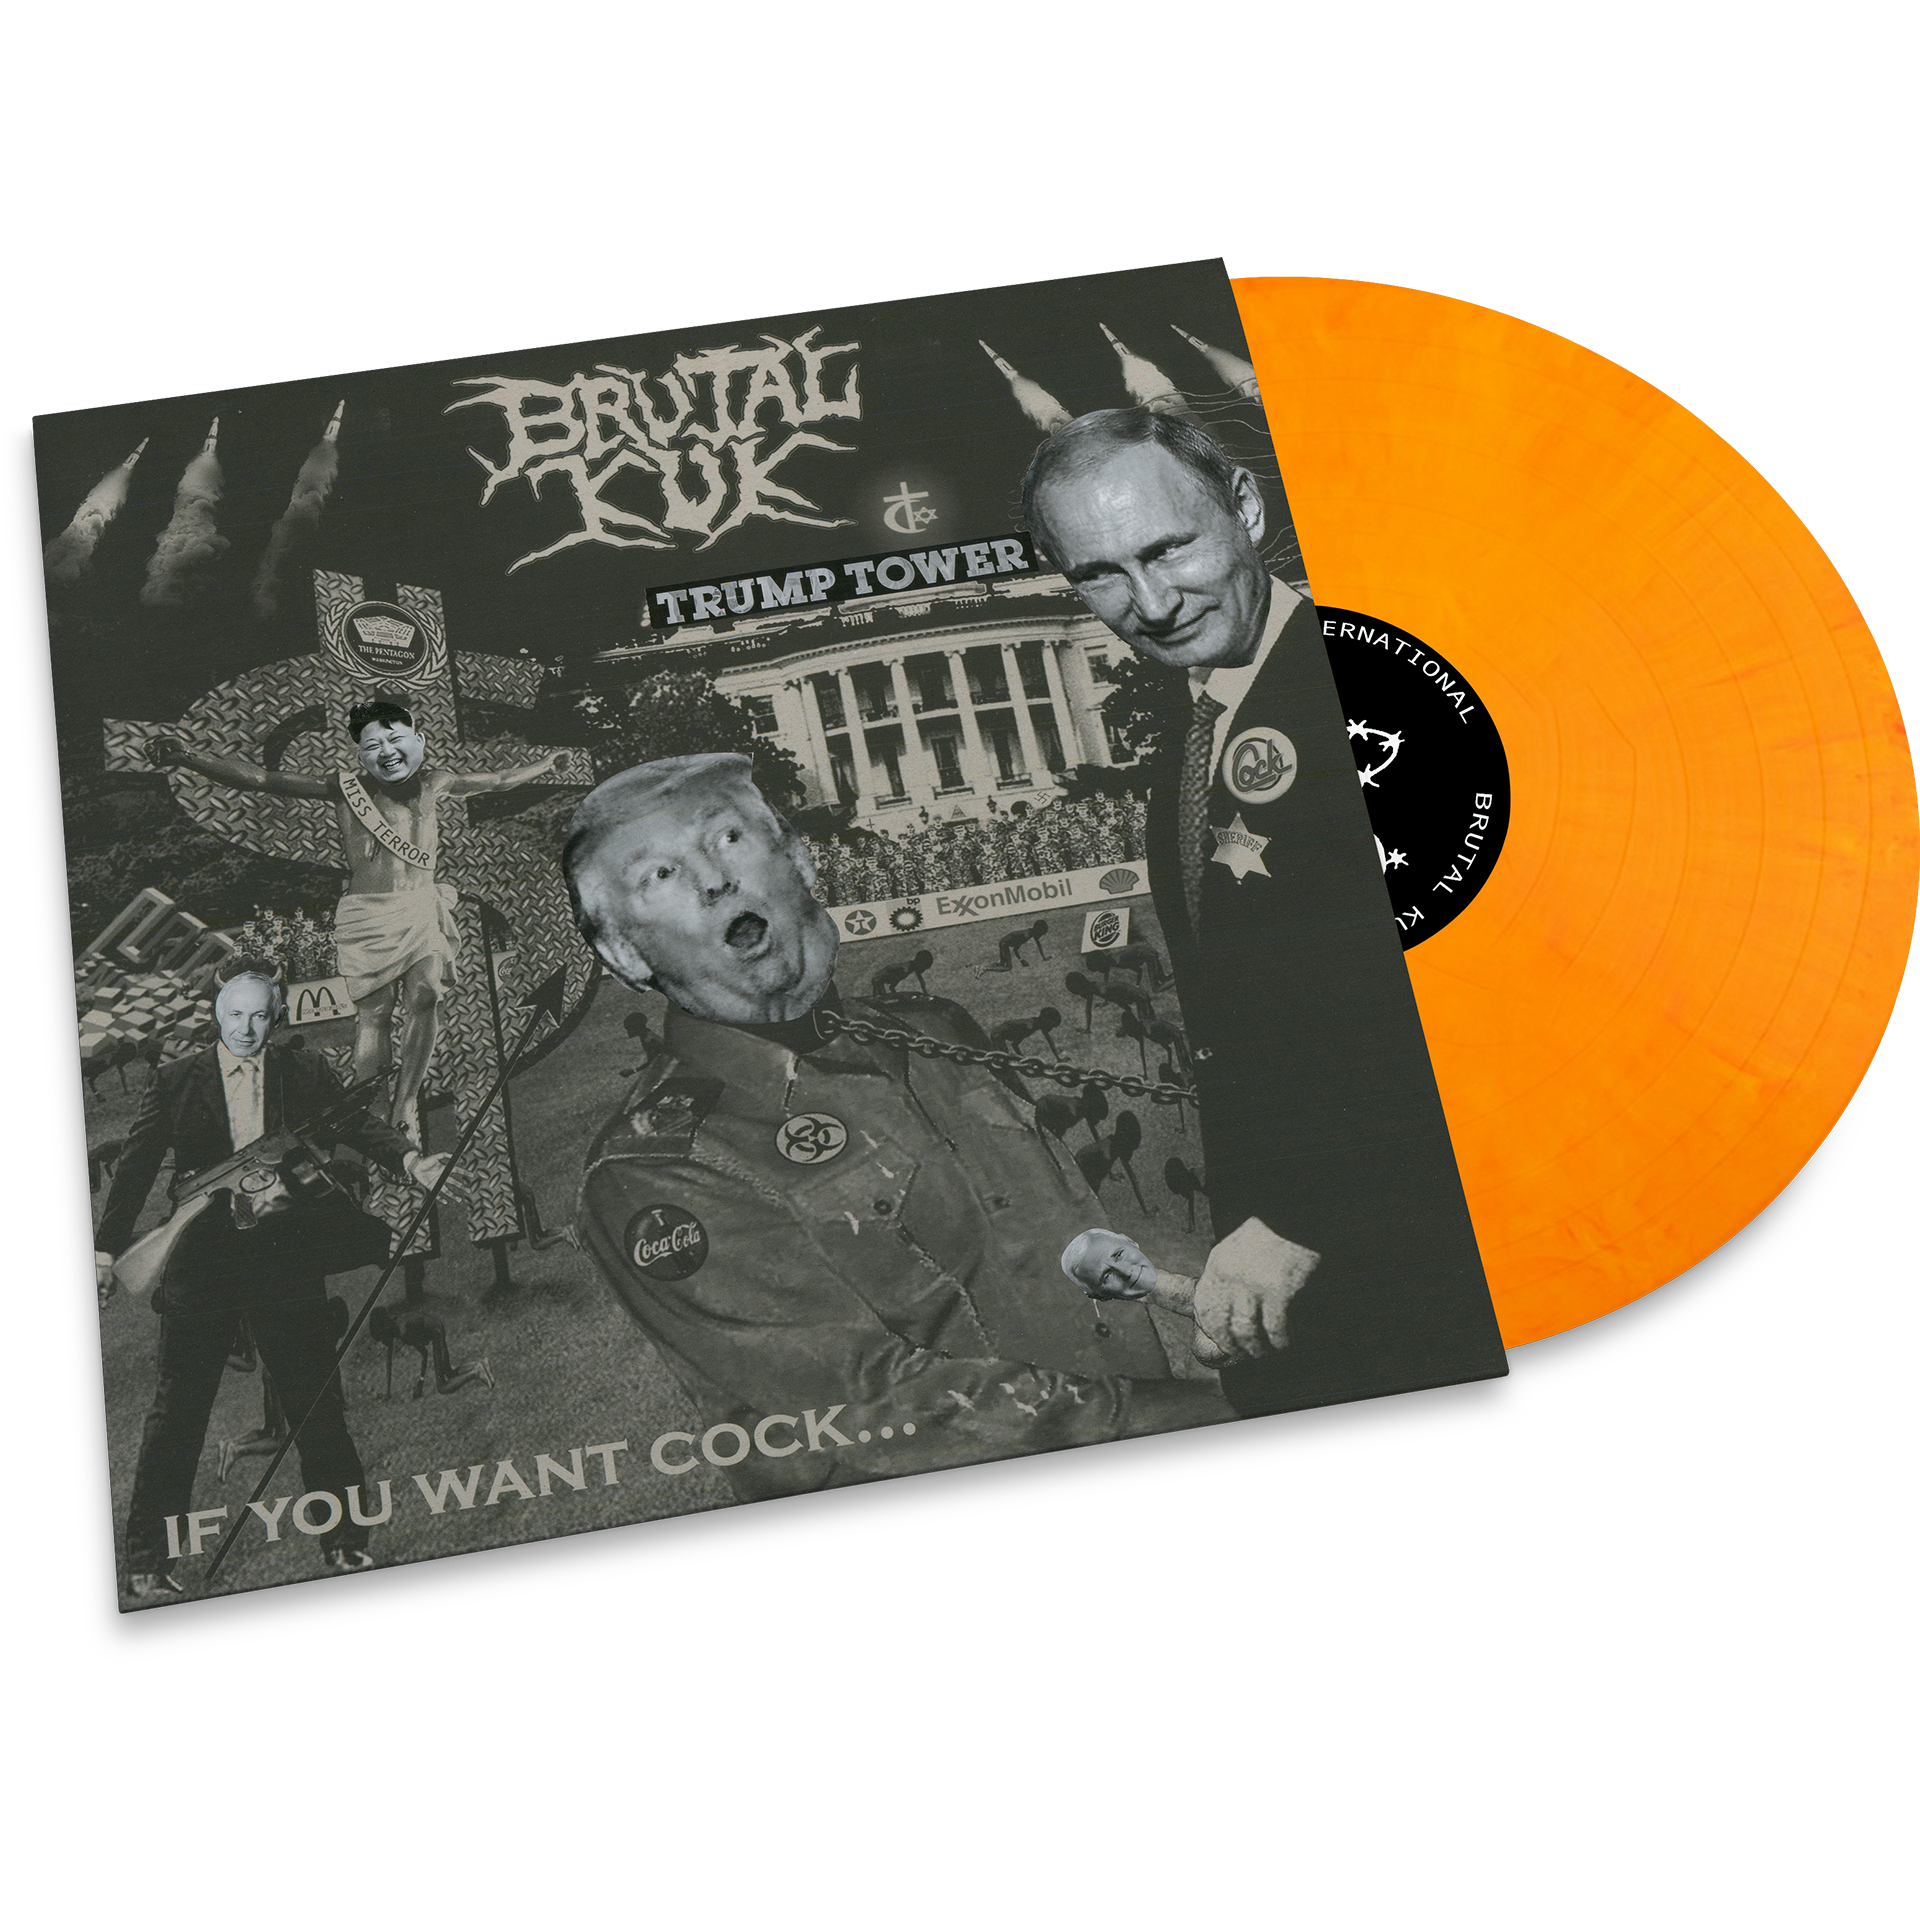 Brutal Kuk - If You Want Cock LP (The Very Presidential Edition)